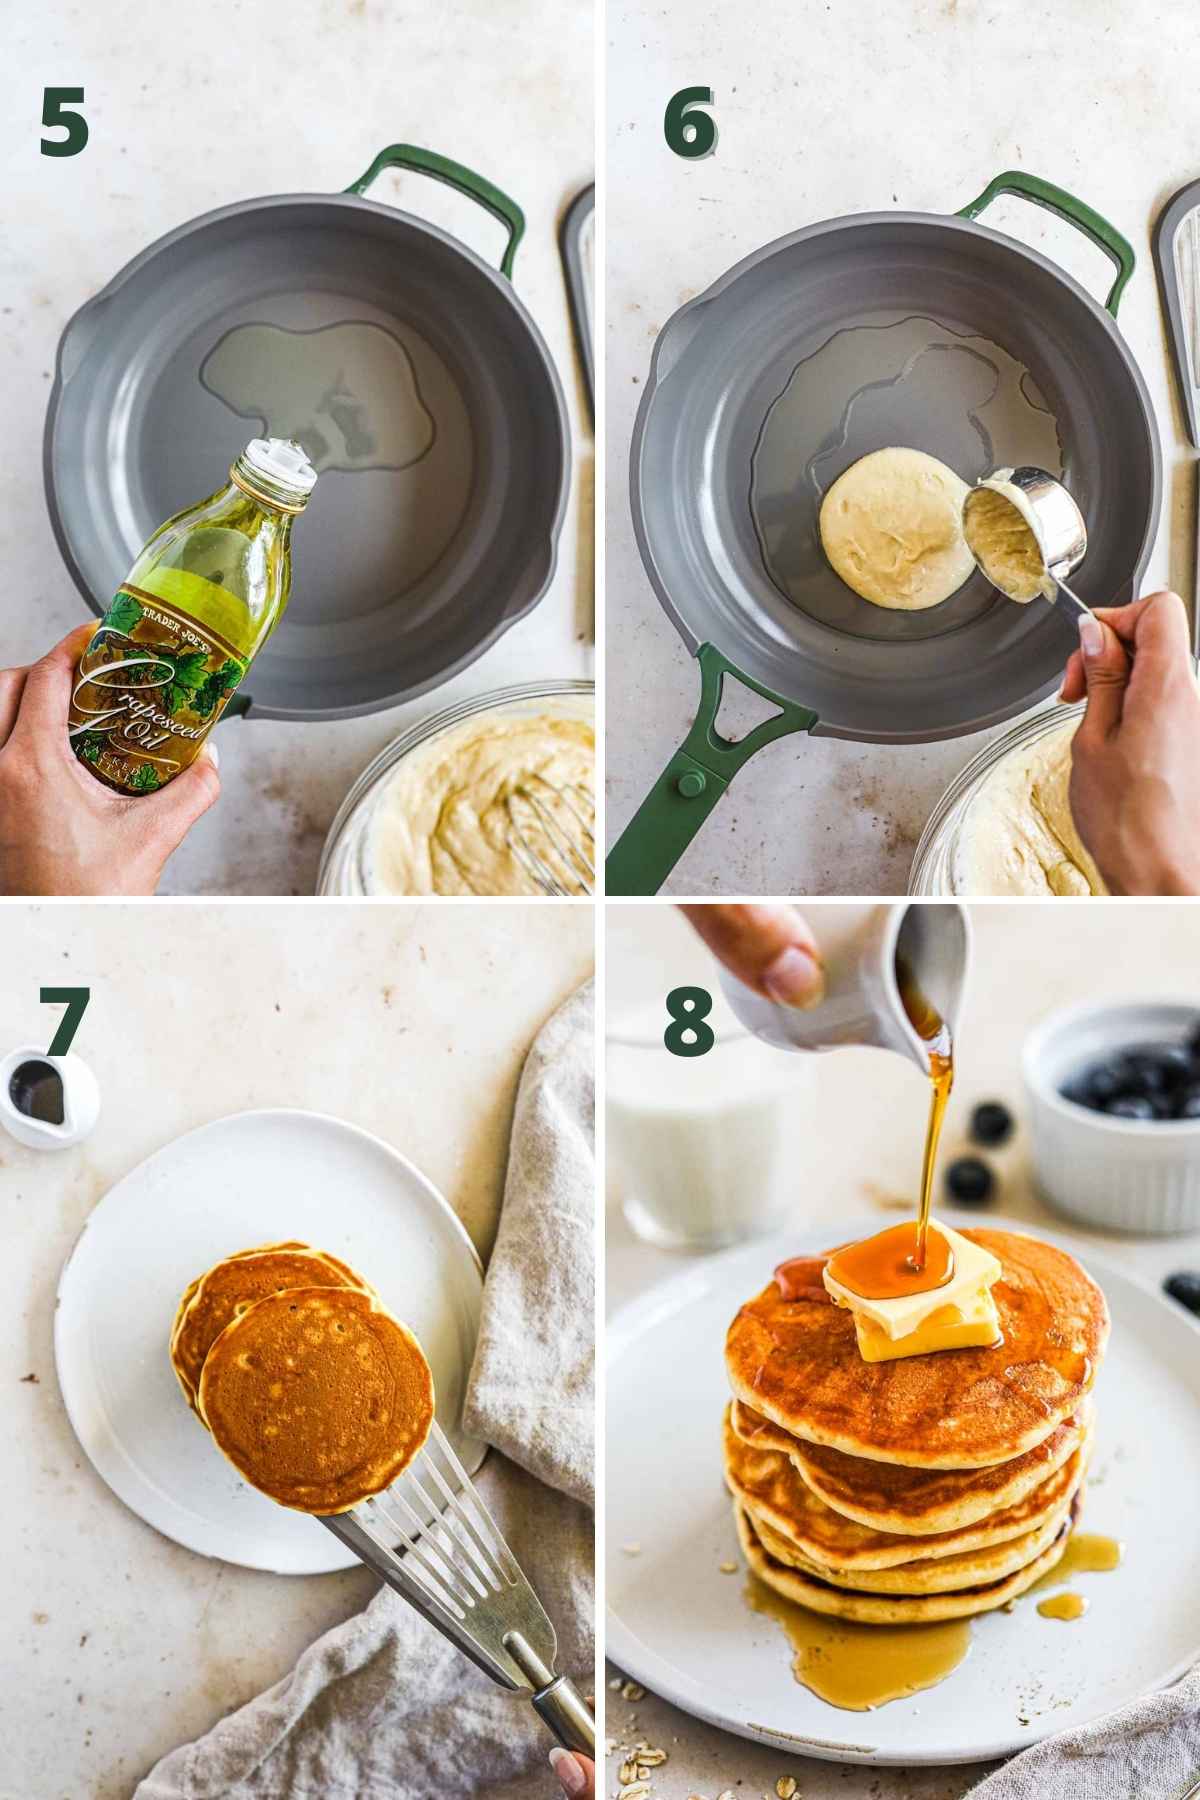 Steps to make fluffy oat milk pancakes, including greasing the pan, adding the batter to the pan, flipping the pancakes, and stacking with butter and maple syrup.